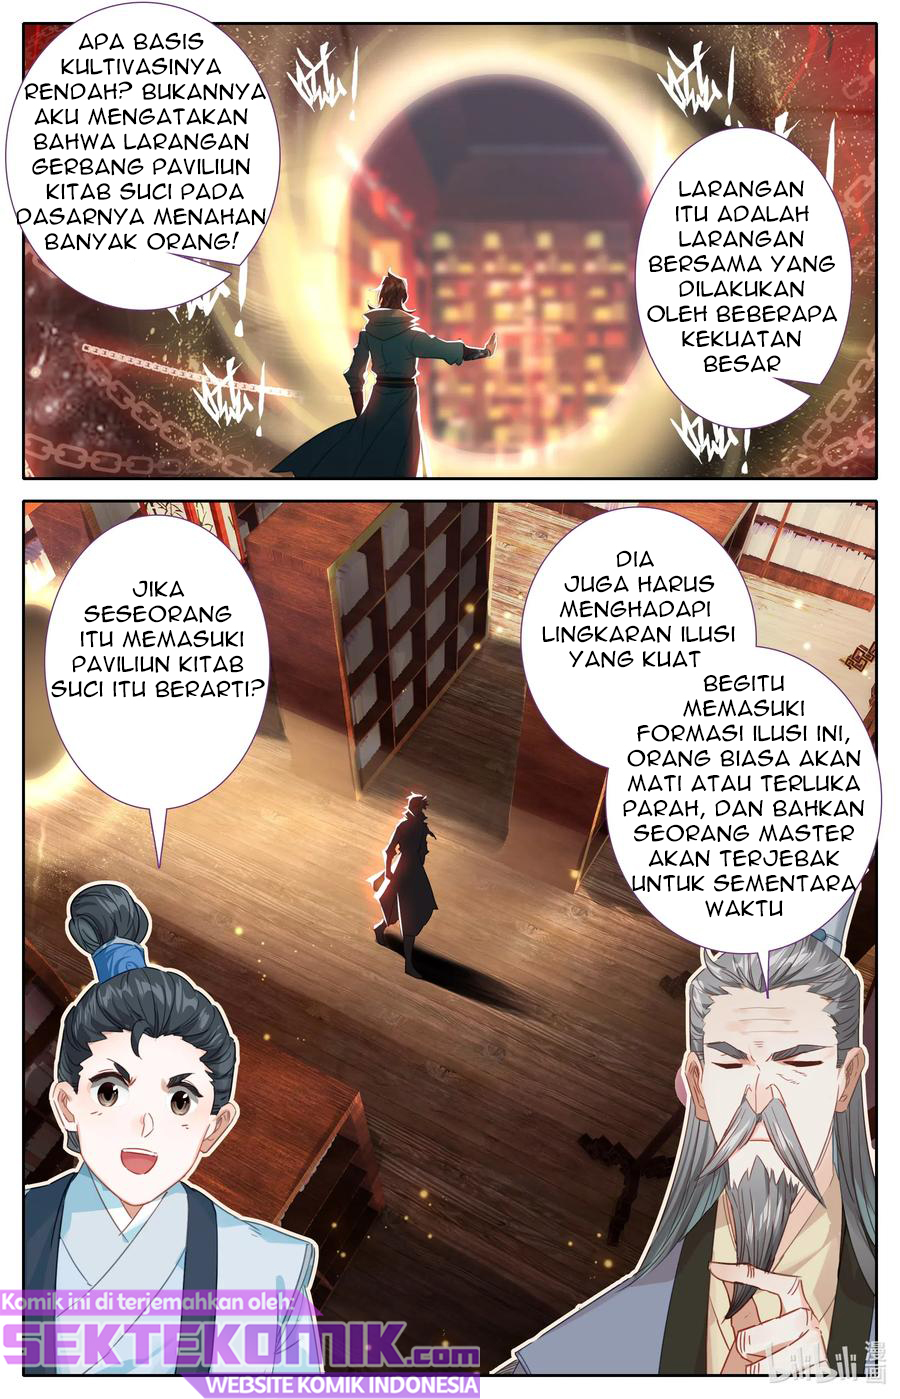 Mortal Cultivation Fairy World Chapter 33